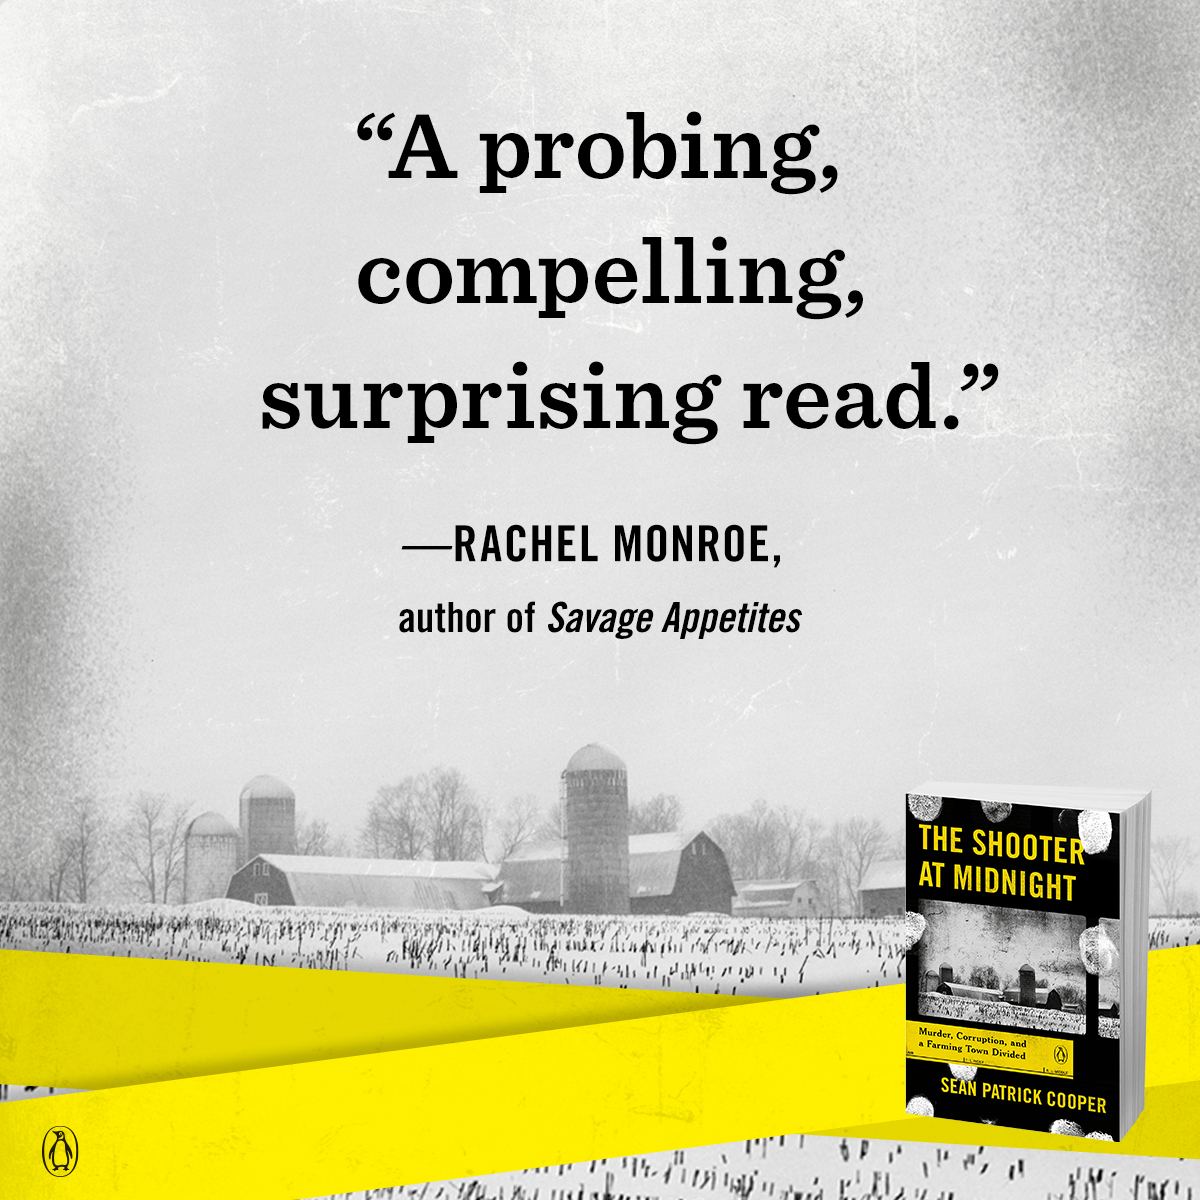 An unsolved murder. A haphazard investigation. A close-knit town reeling from the aftereffects of the farming crisis. THE SHOOTER AT MIDNIGHT by journalist Sean Patrick Cooper is a 'probing, compelling, surprising read' (@rachmonroe) and on sale TODAY 👉 bit.ly/3xFzfKE